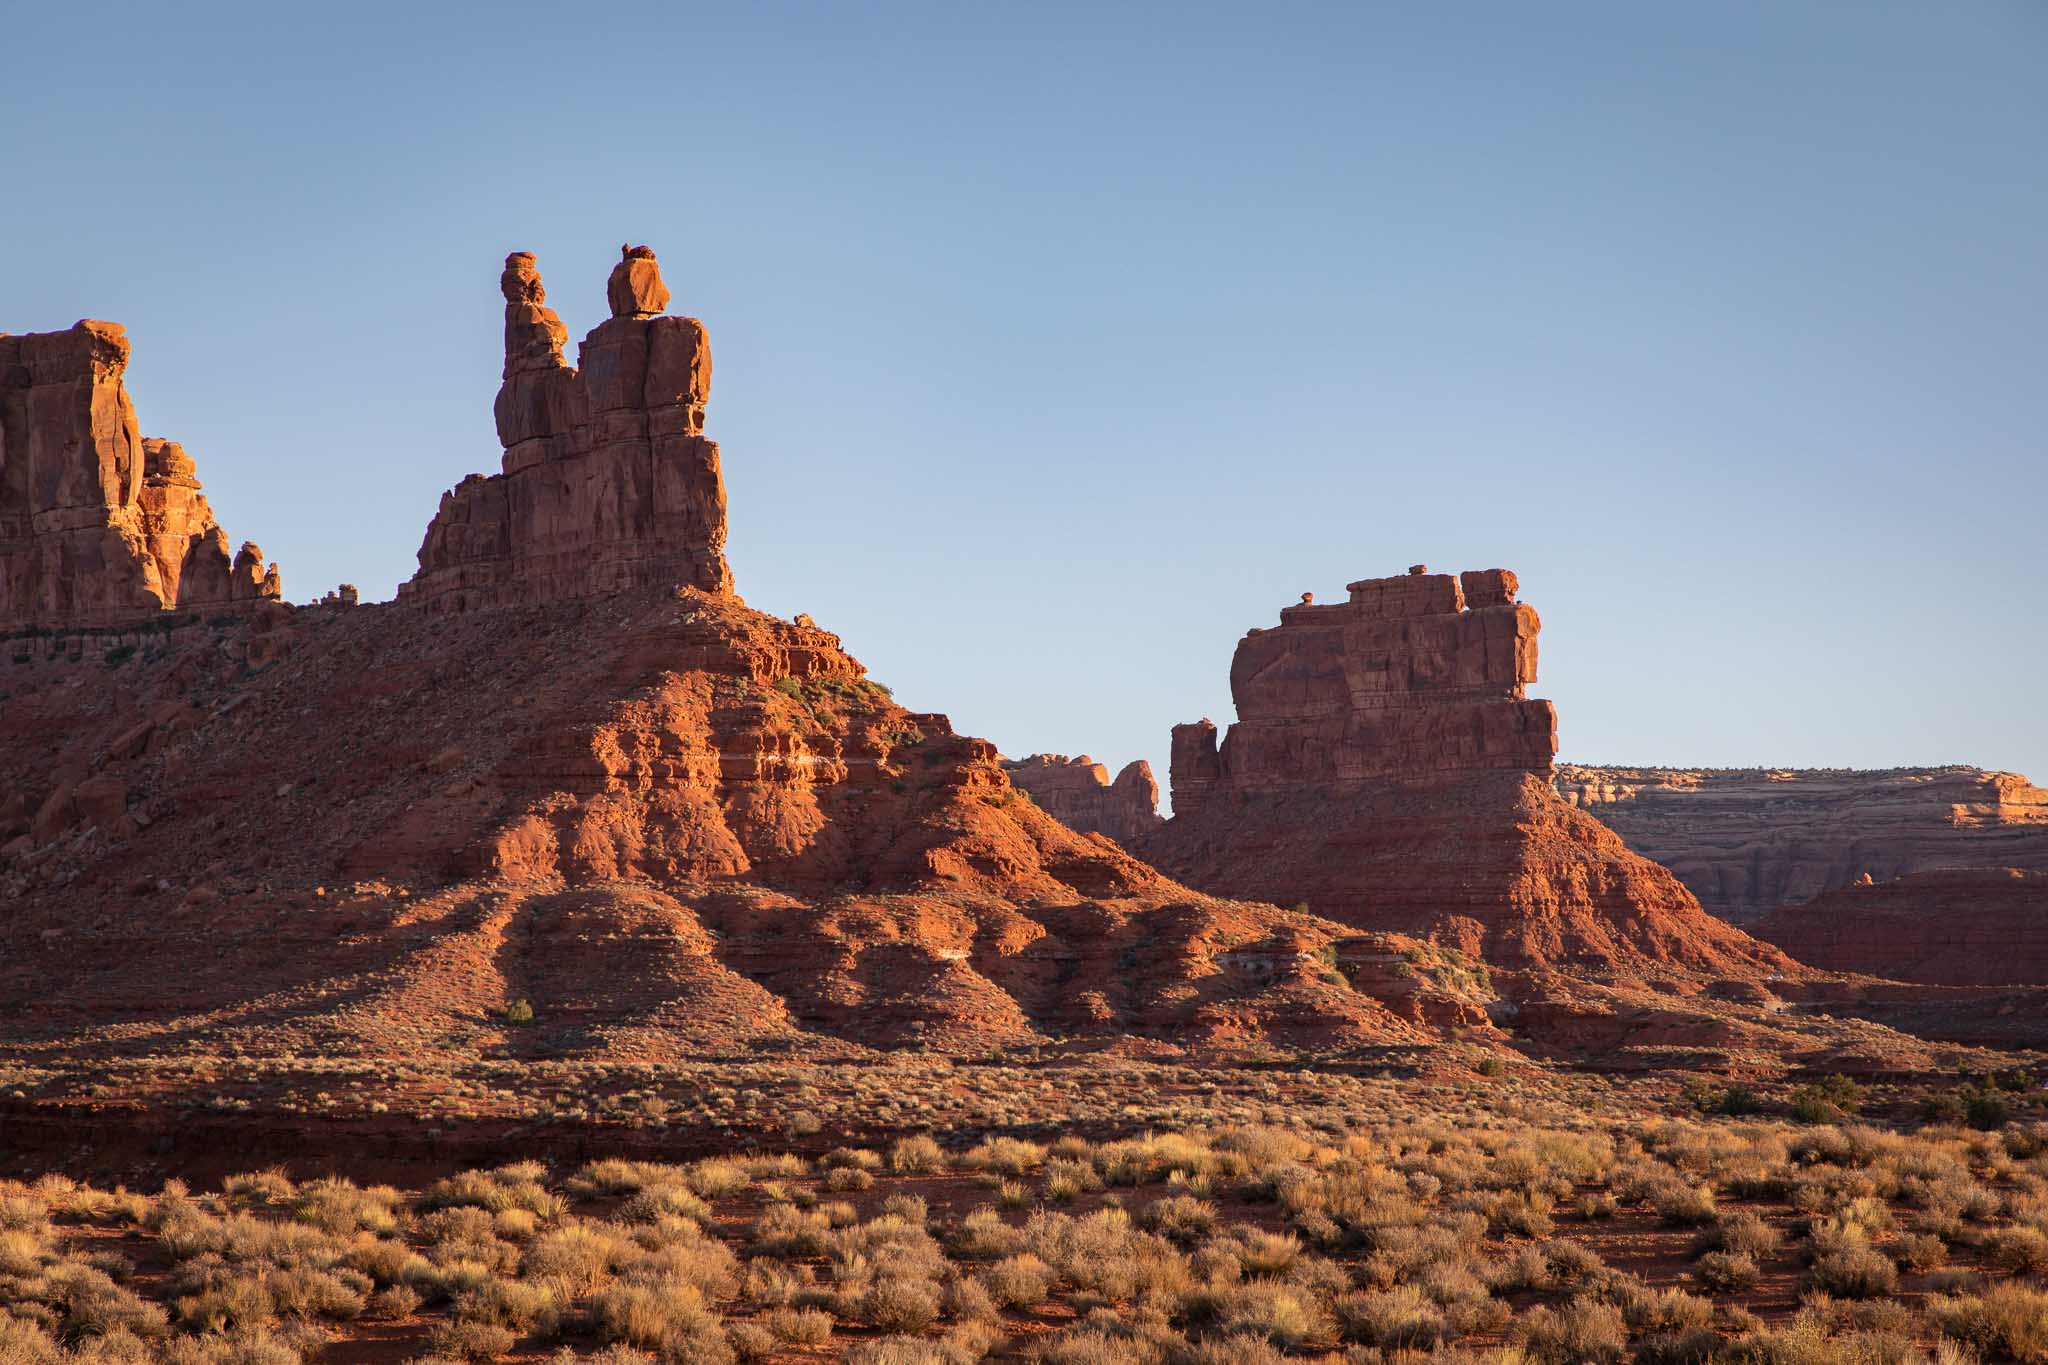 Landscape with Rudolph and Santa Claus rock formation, Valley of the Gods, Mexican Hat UT, May 17, 2018